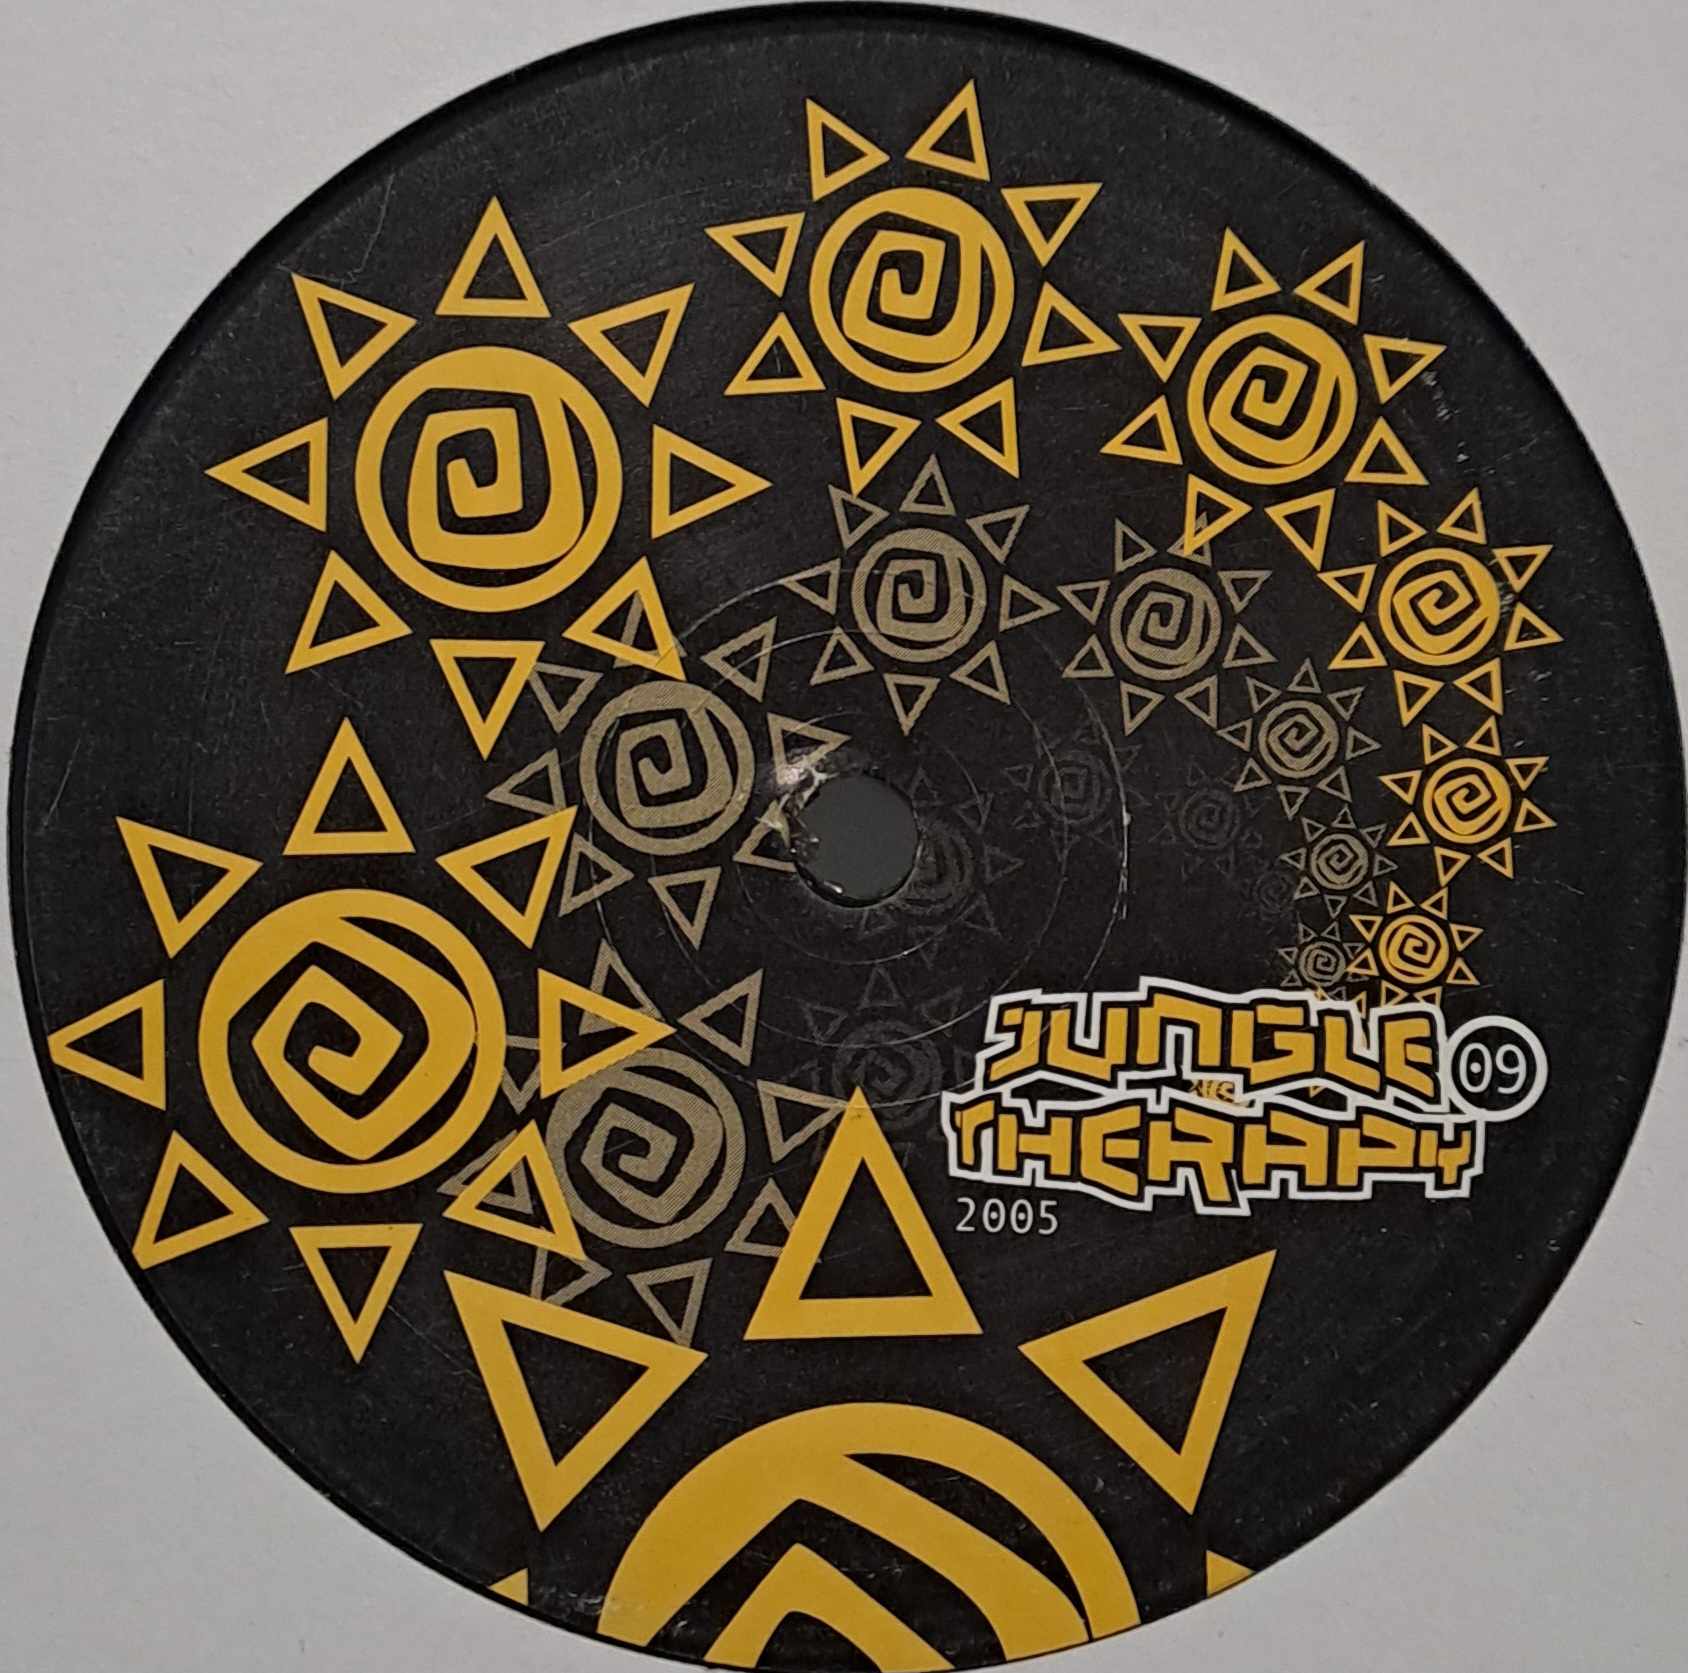 Jungle Therapy 009 - vinyle Drum & Bass